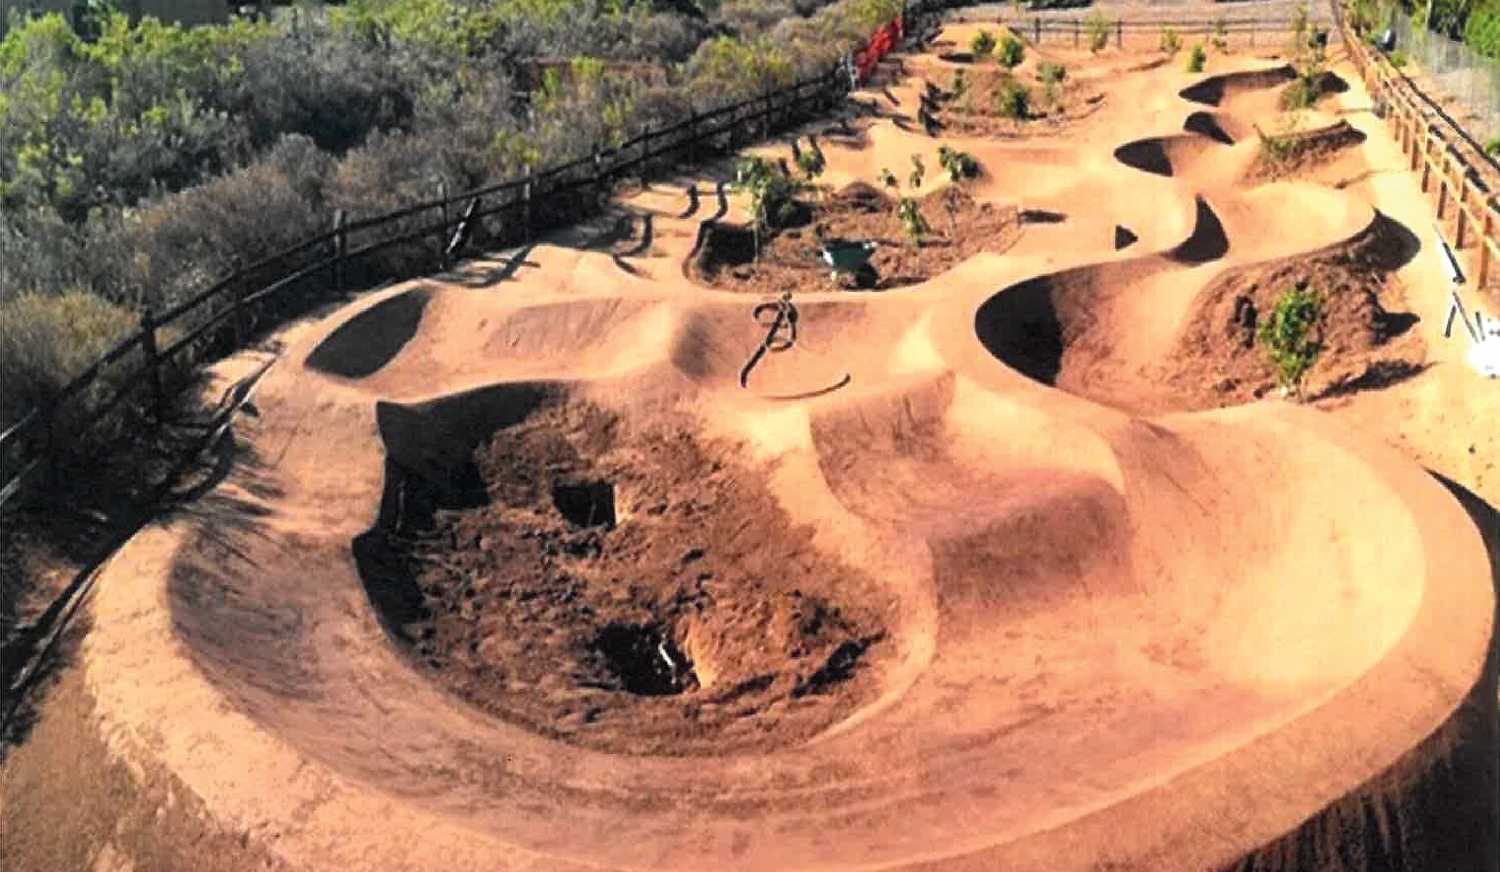 An example of a BMX Pump Track. Moosomin is planning to build a BMX Pump Track at Bradley Park so that kids have a safe and fun place to ride their BMX bikes.